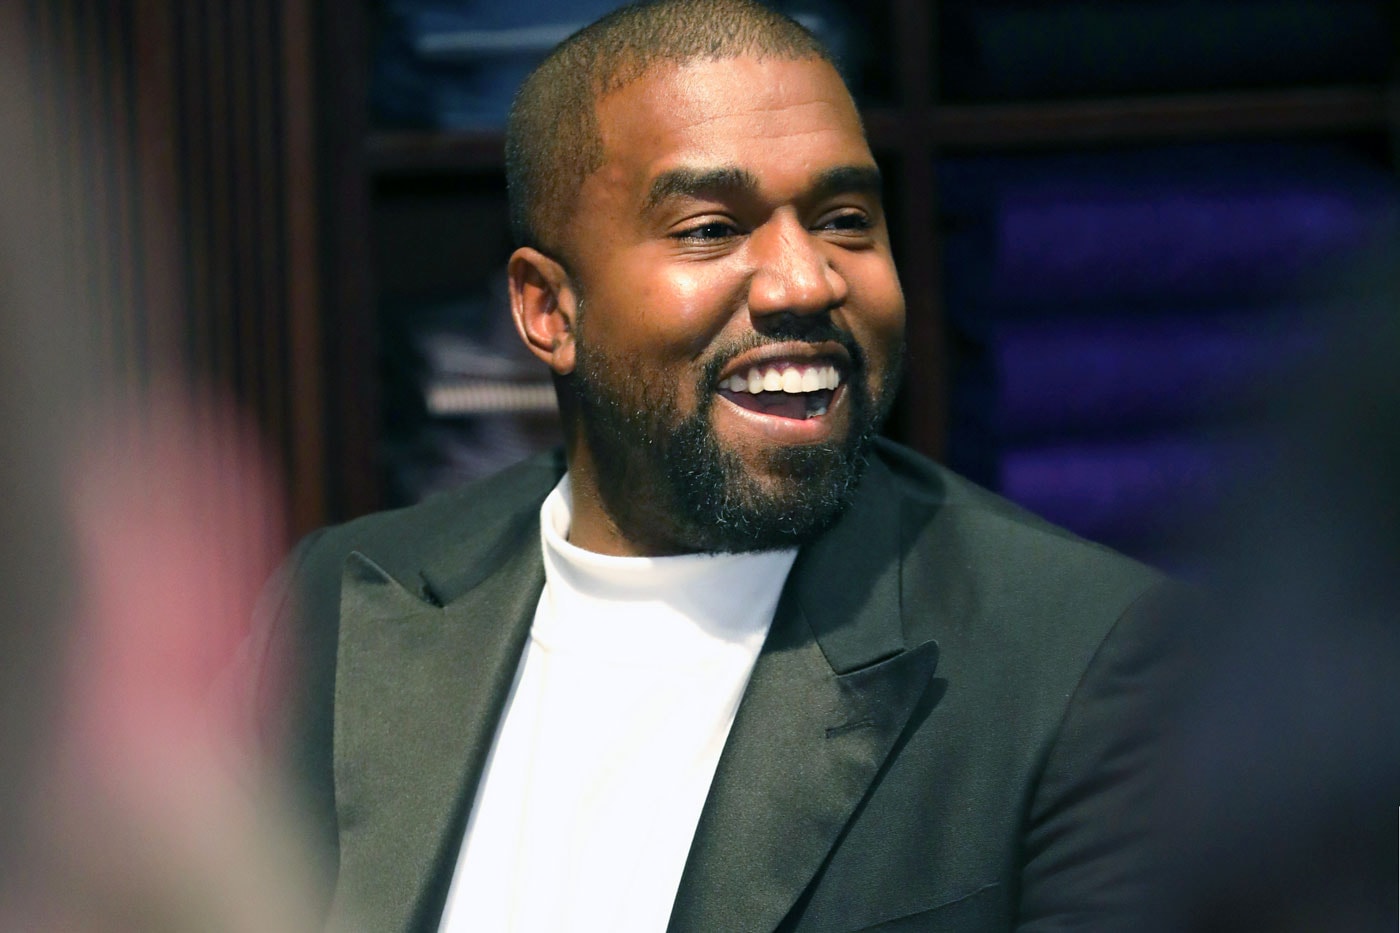 Watch Kanye West's Passionate Speech About Self-Love